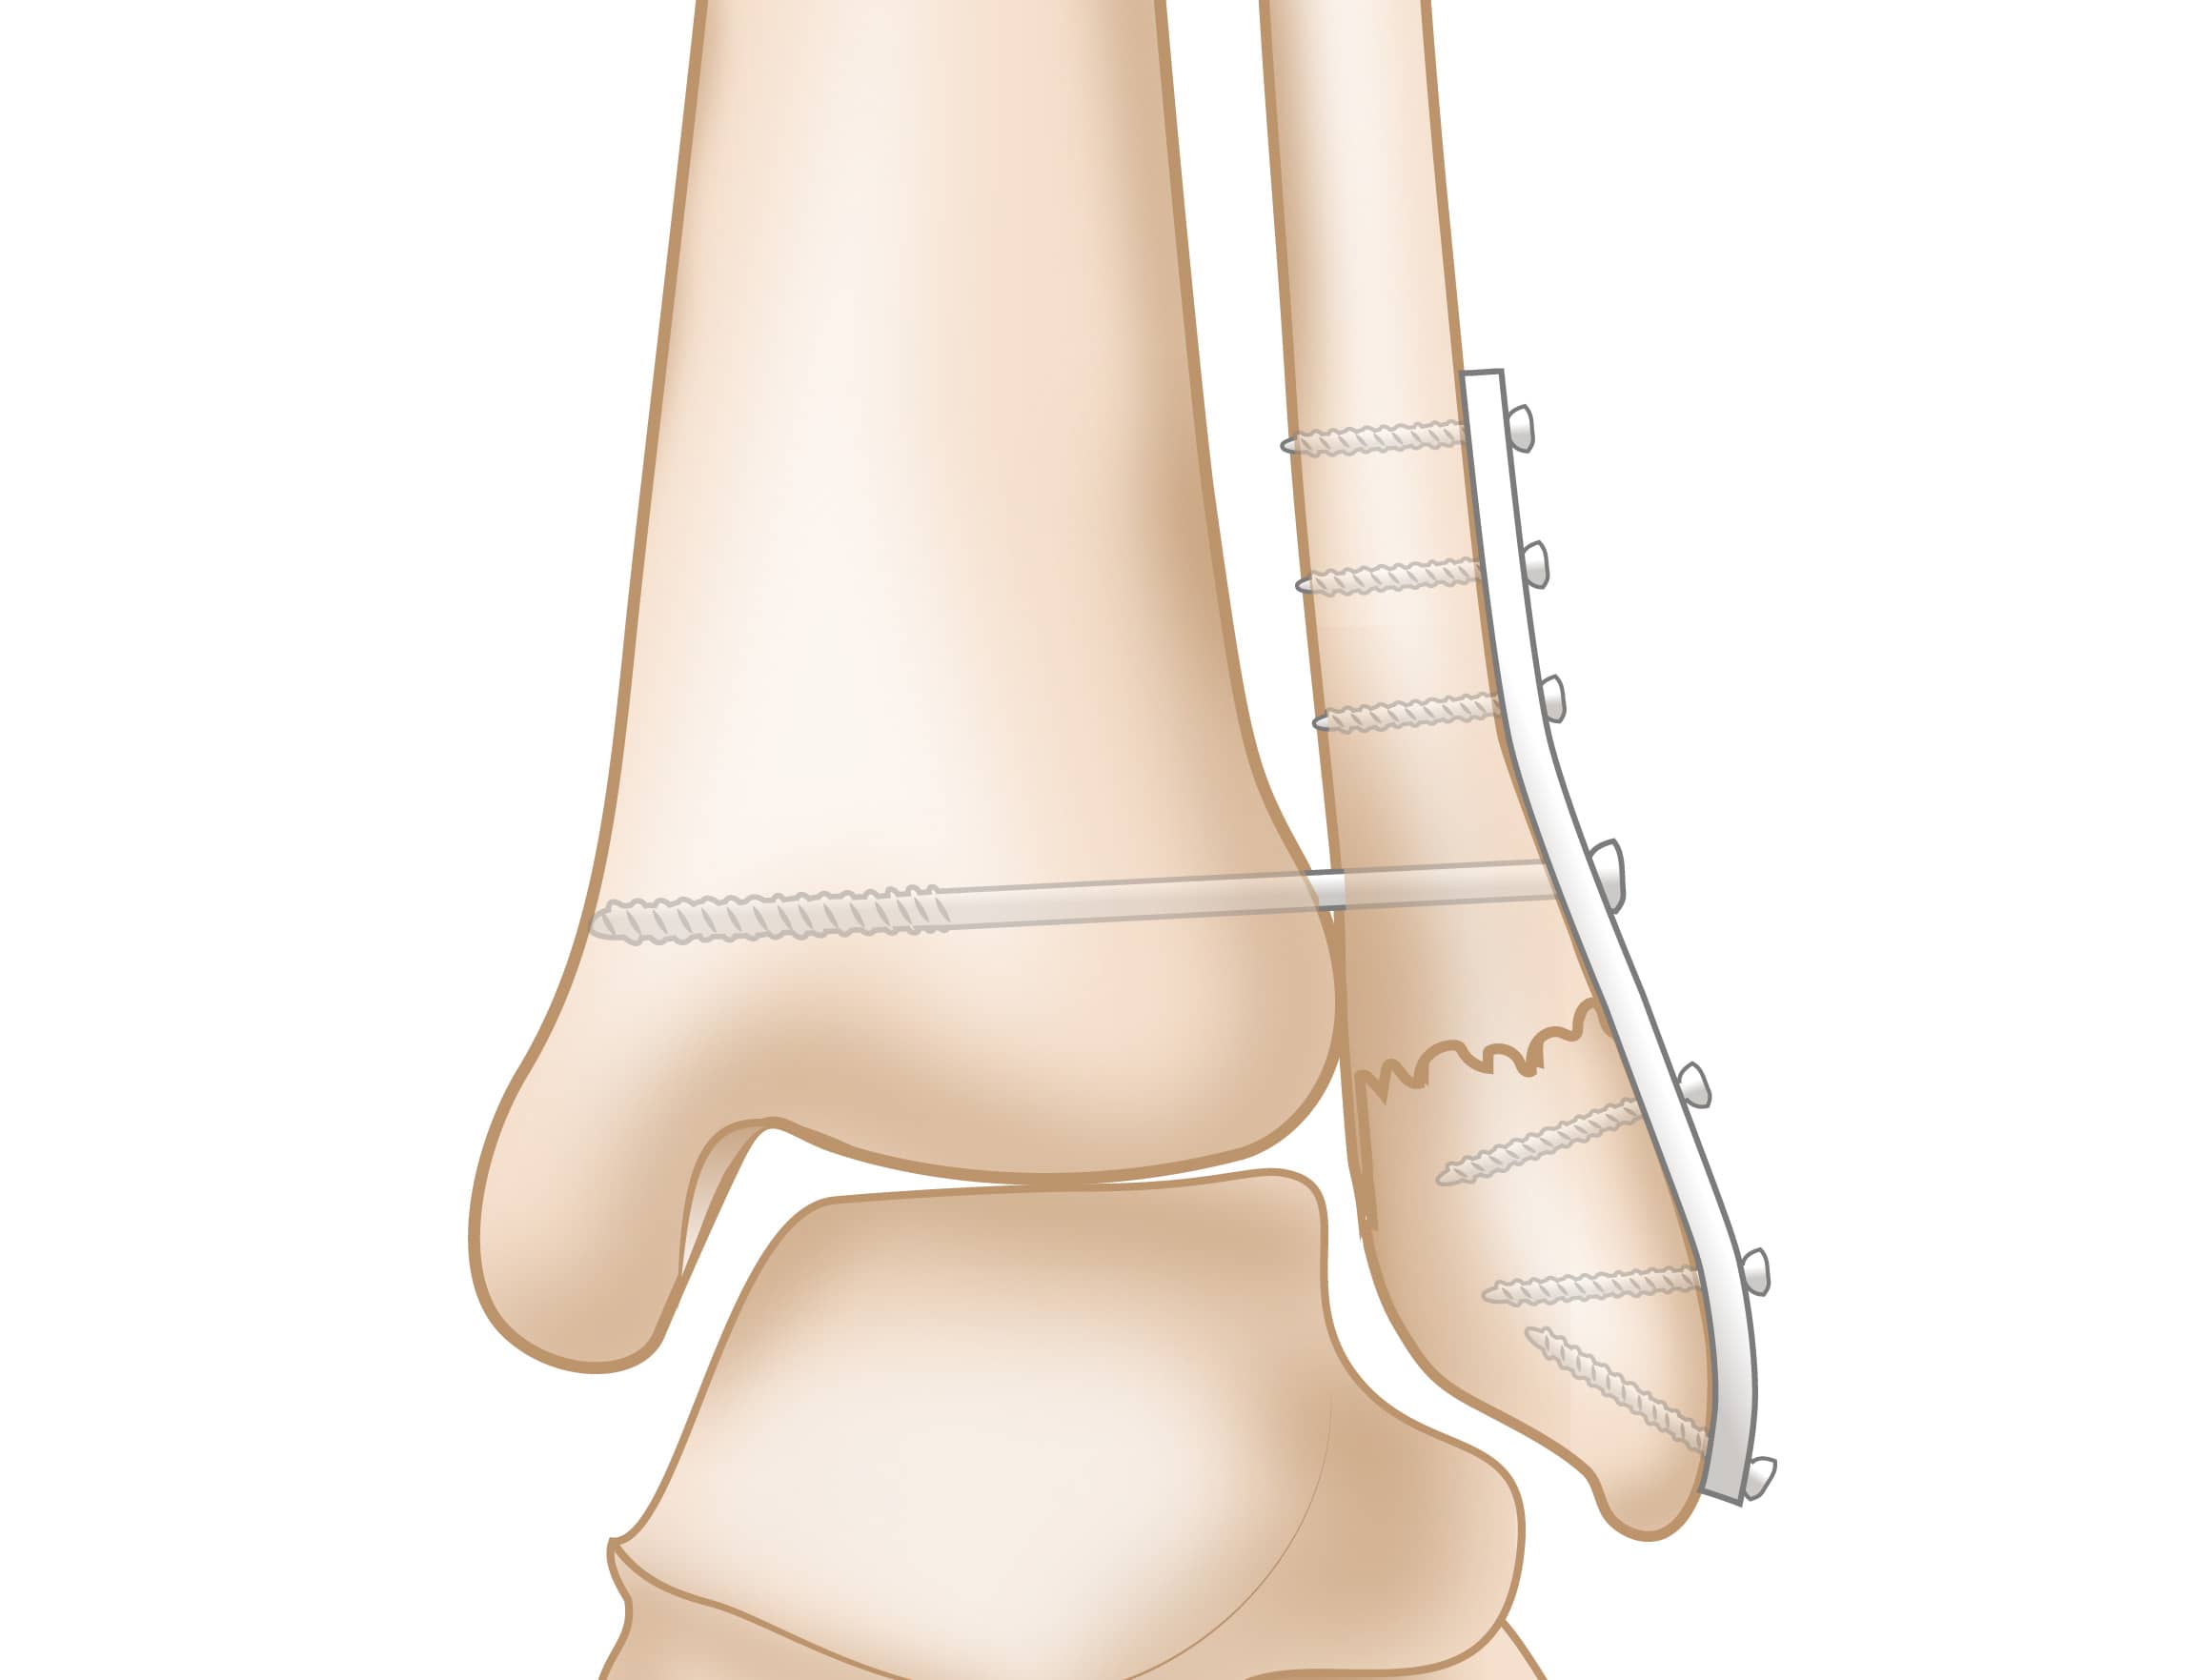 Surgical Repair of a Syndesmosis Injury and Lateral Malleolus Fracture